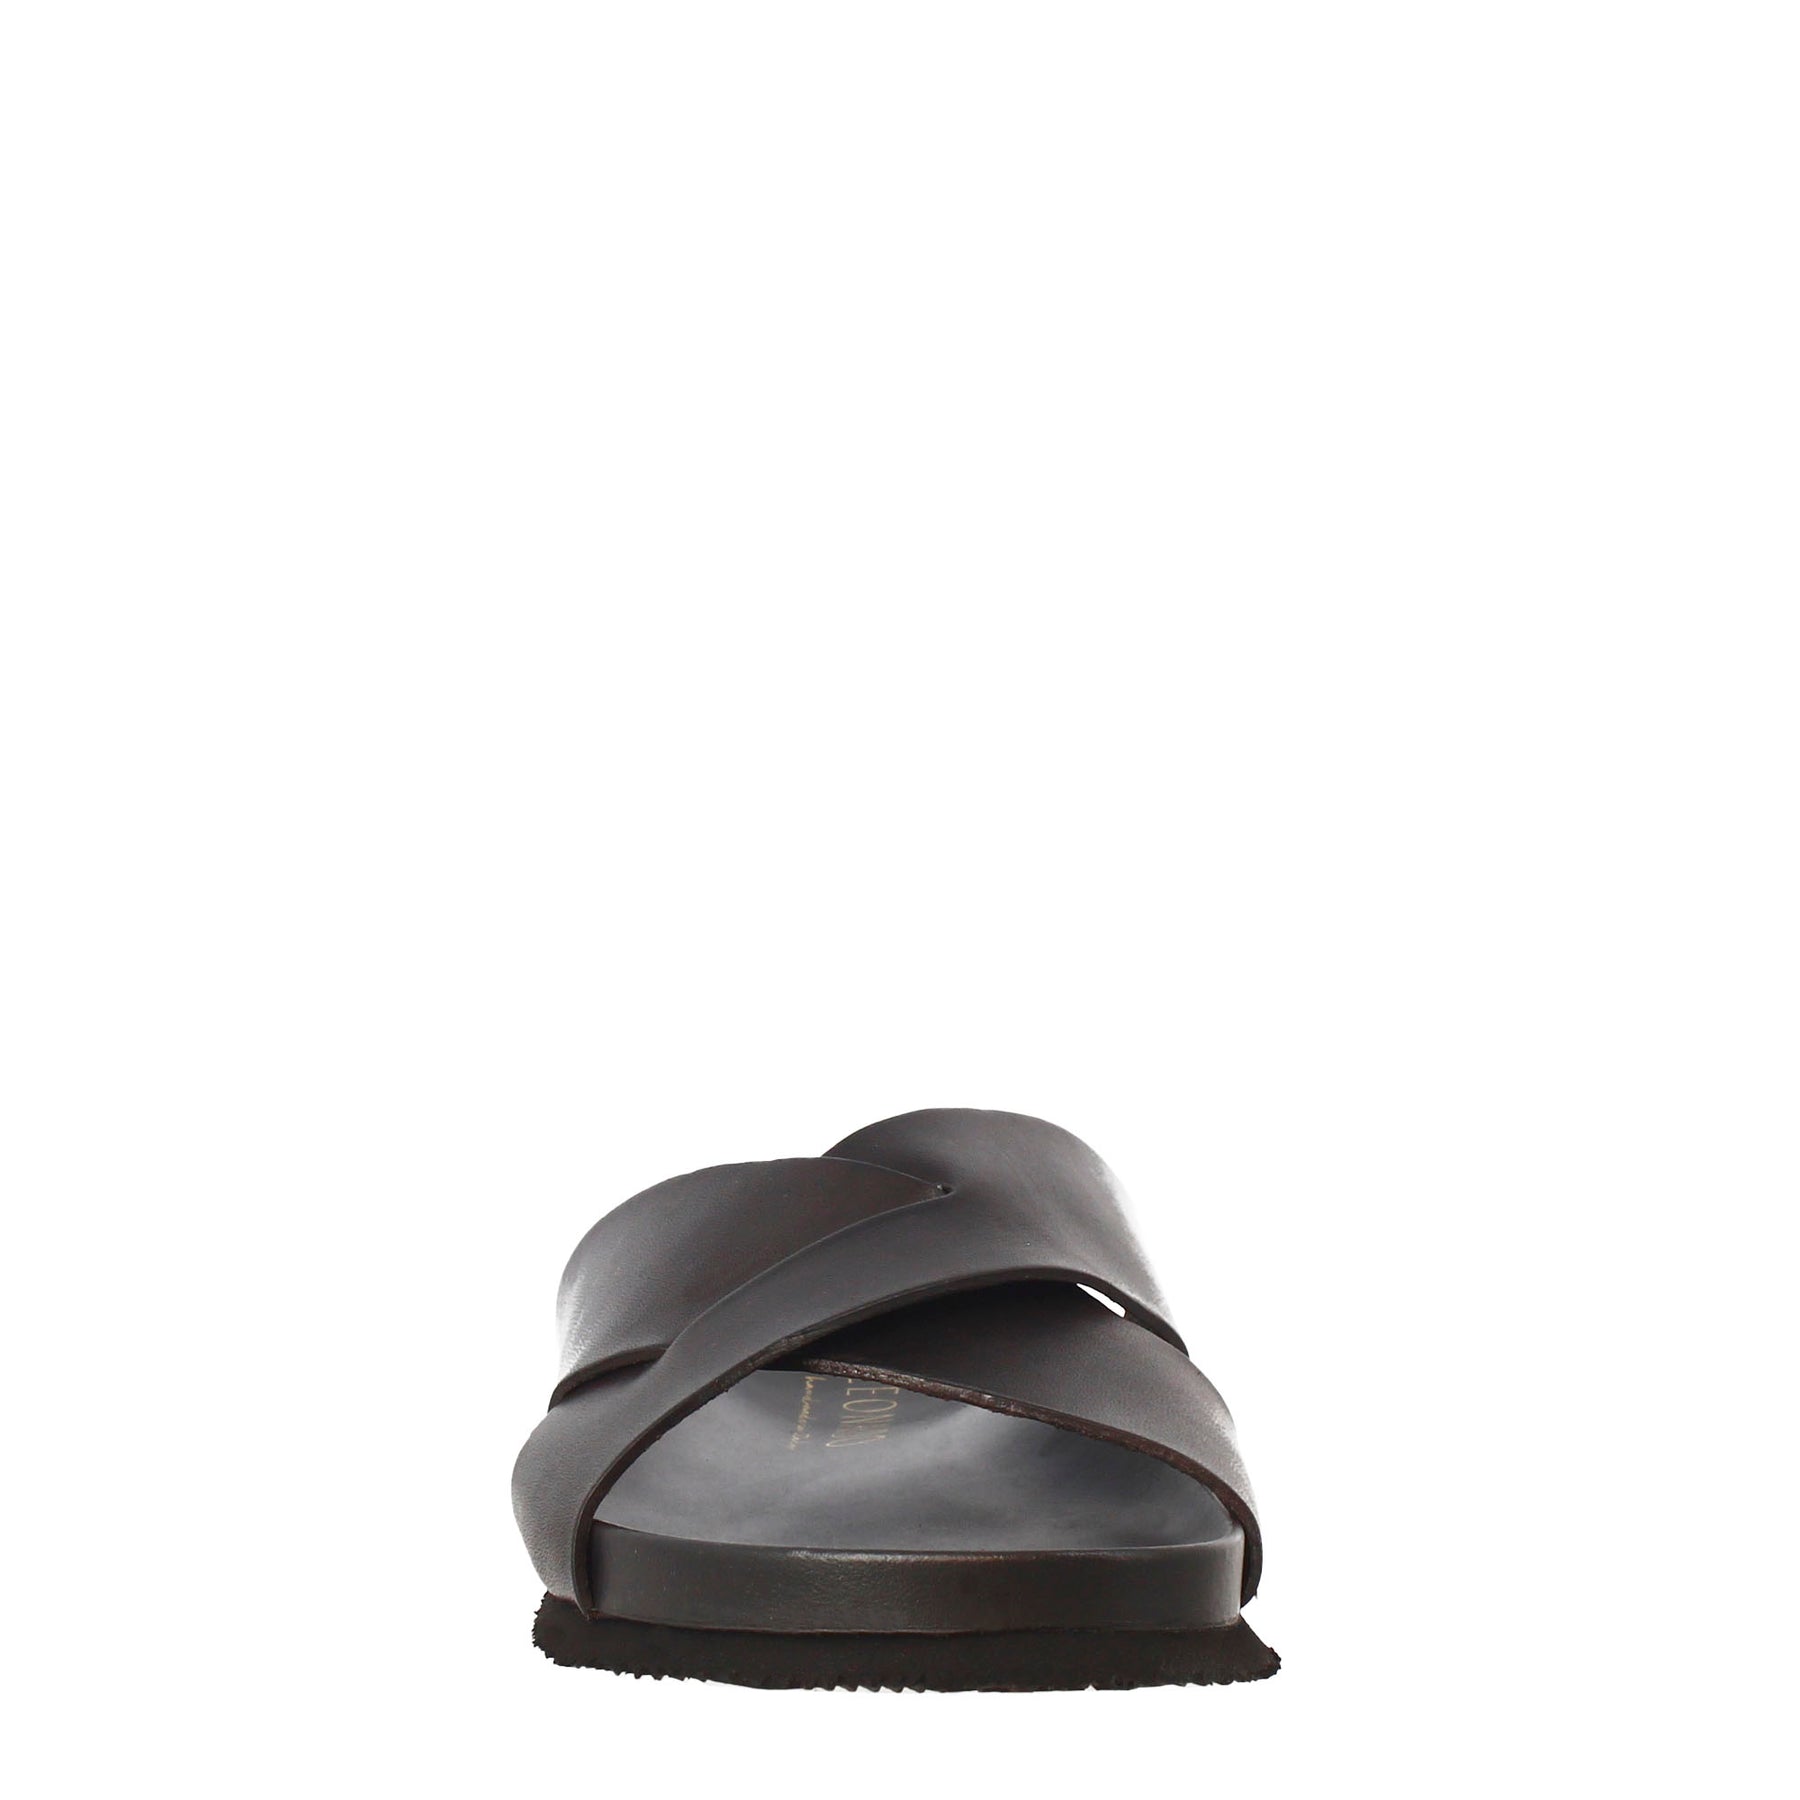 Dark brown men's sandals in leather with open back